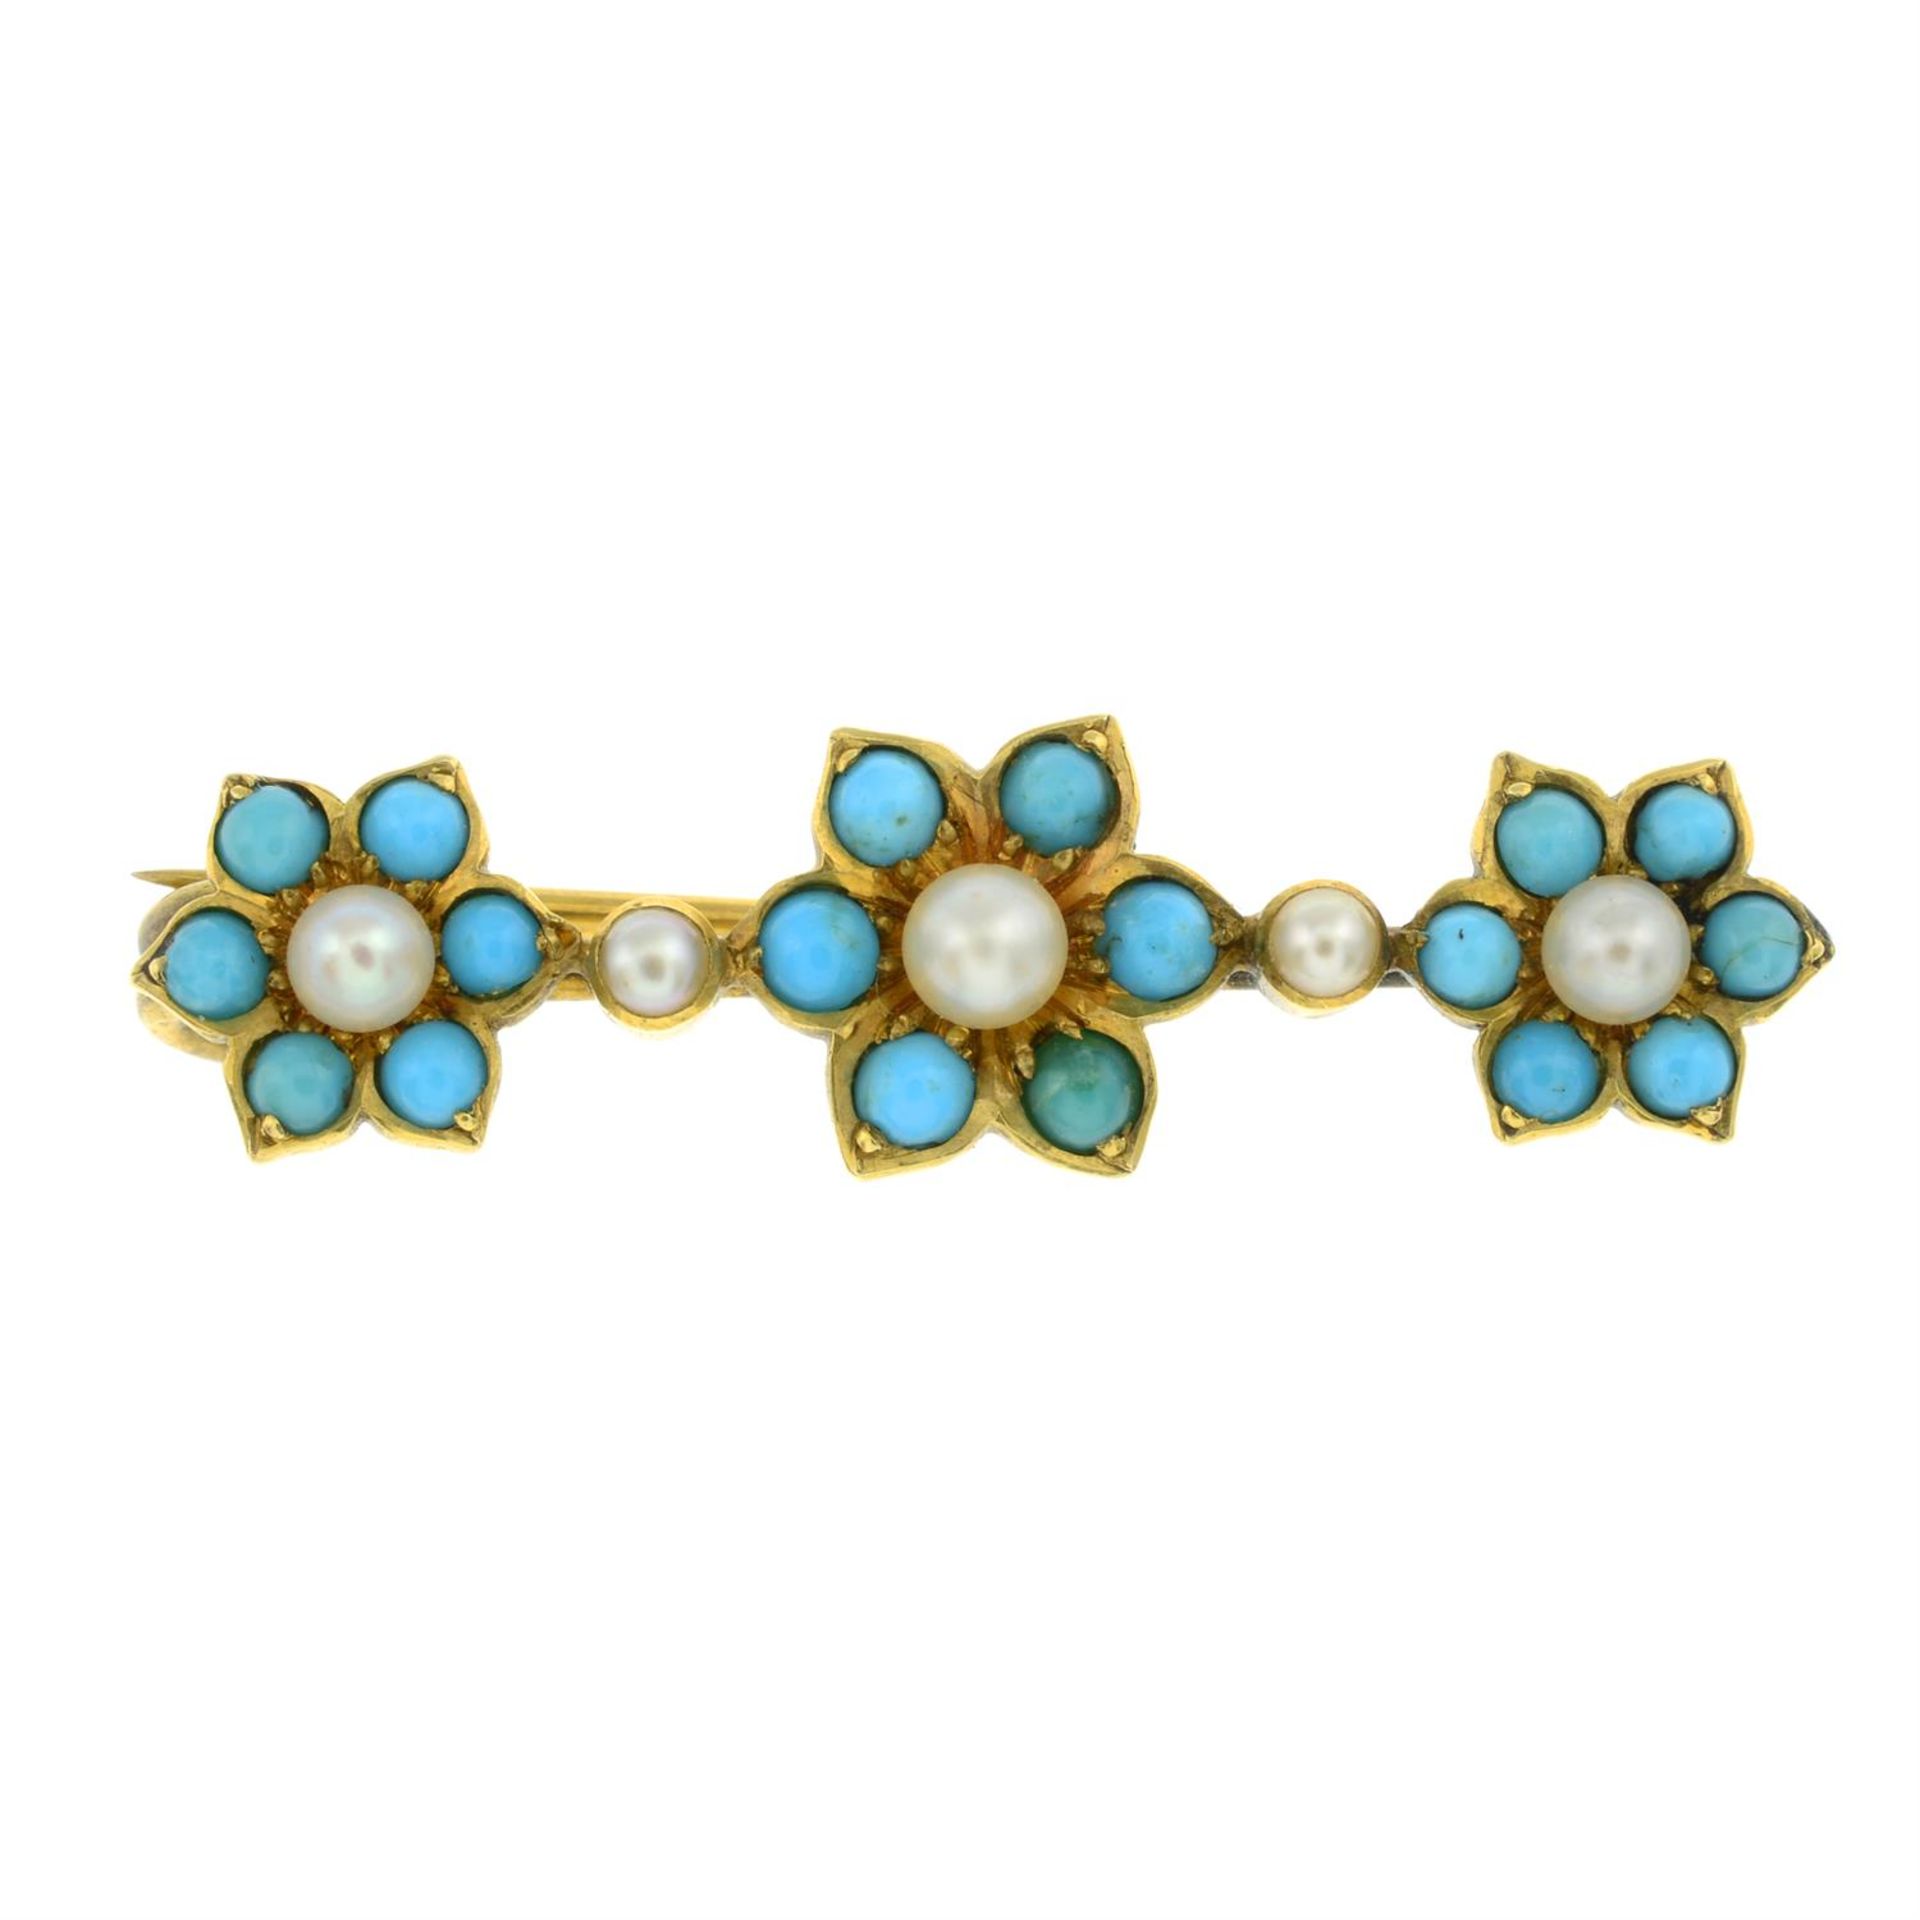 Early 20th century turquoise & split pearl brooch